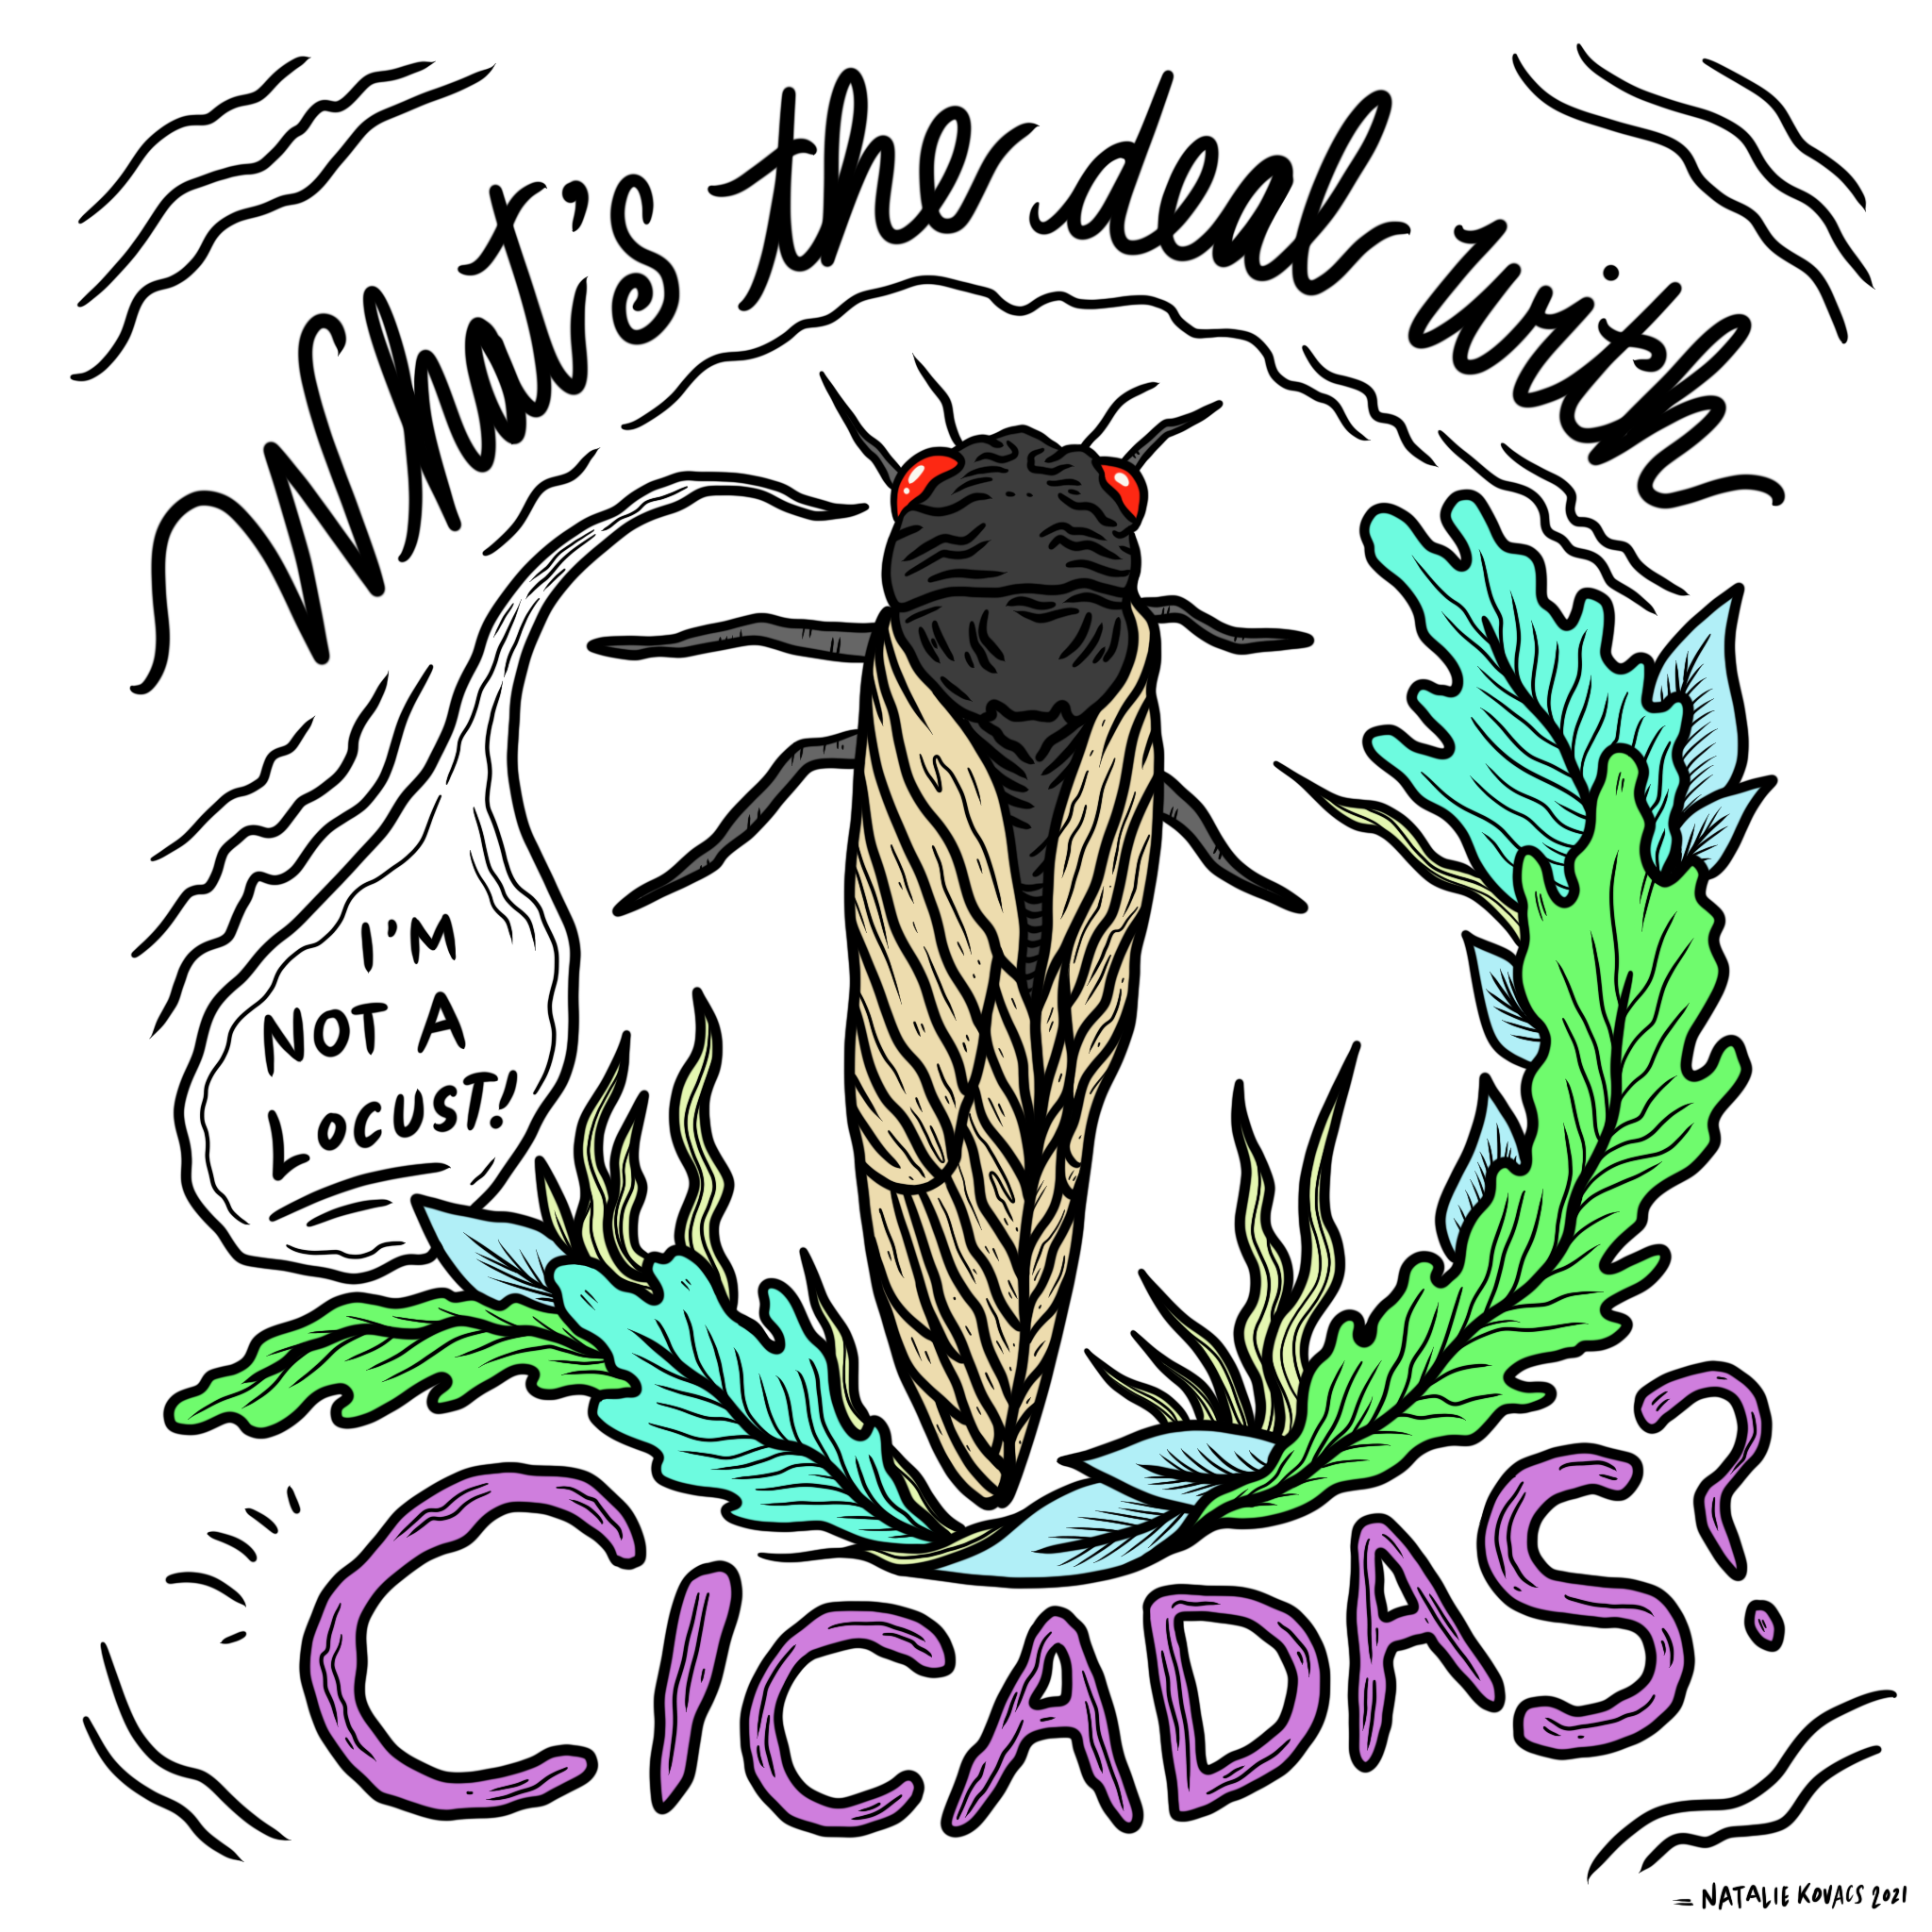 What’s the deal with Cicadas? I’m not a locust!